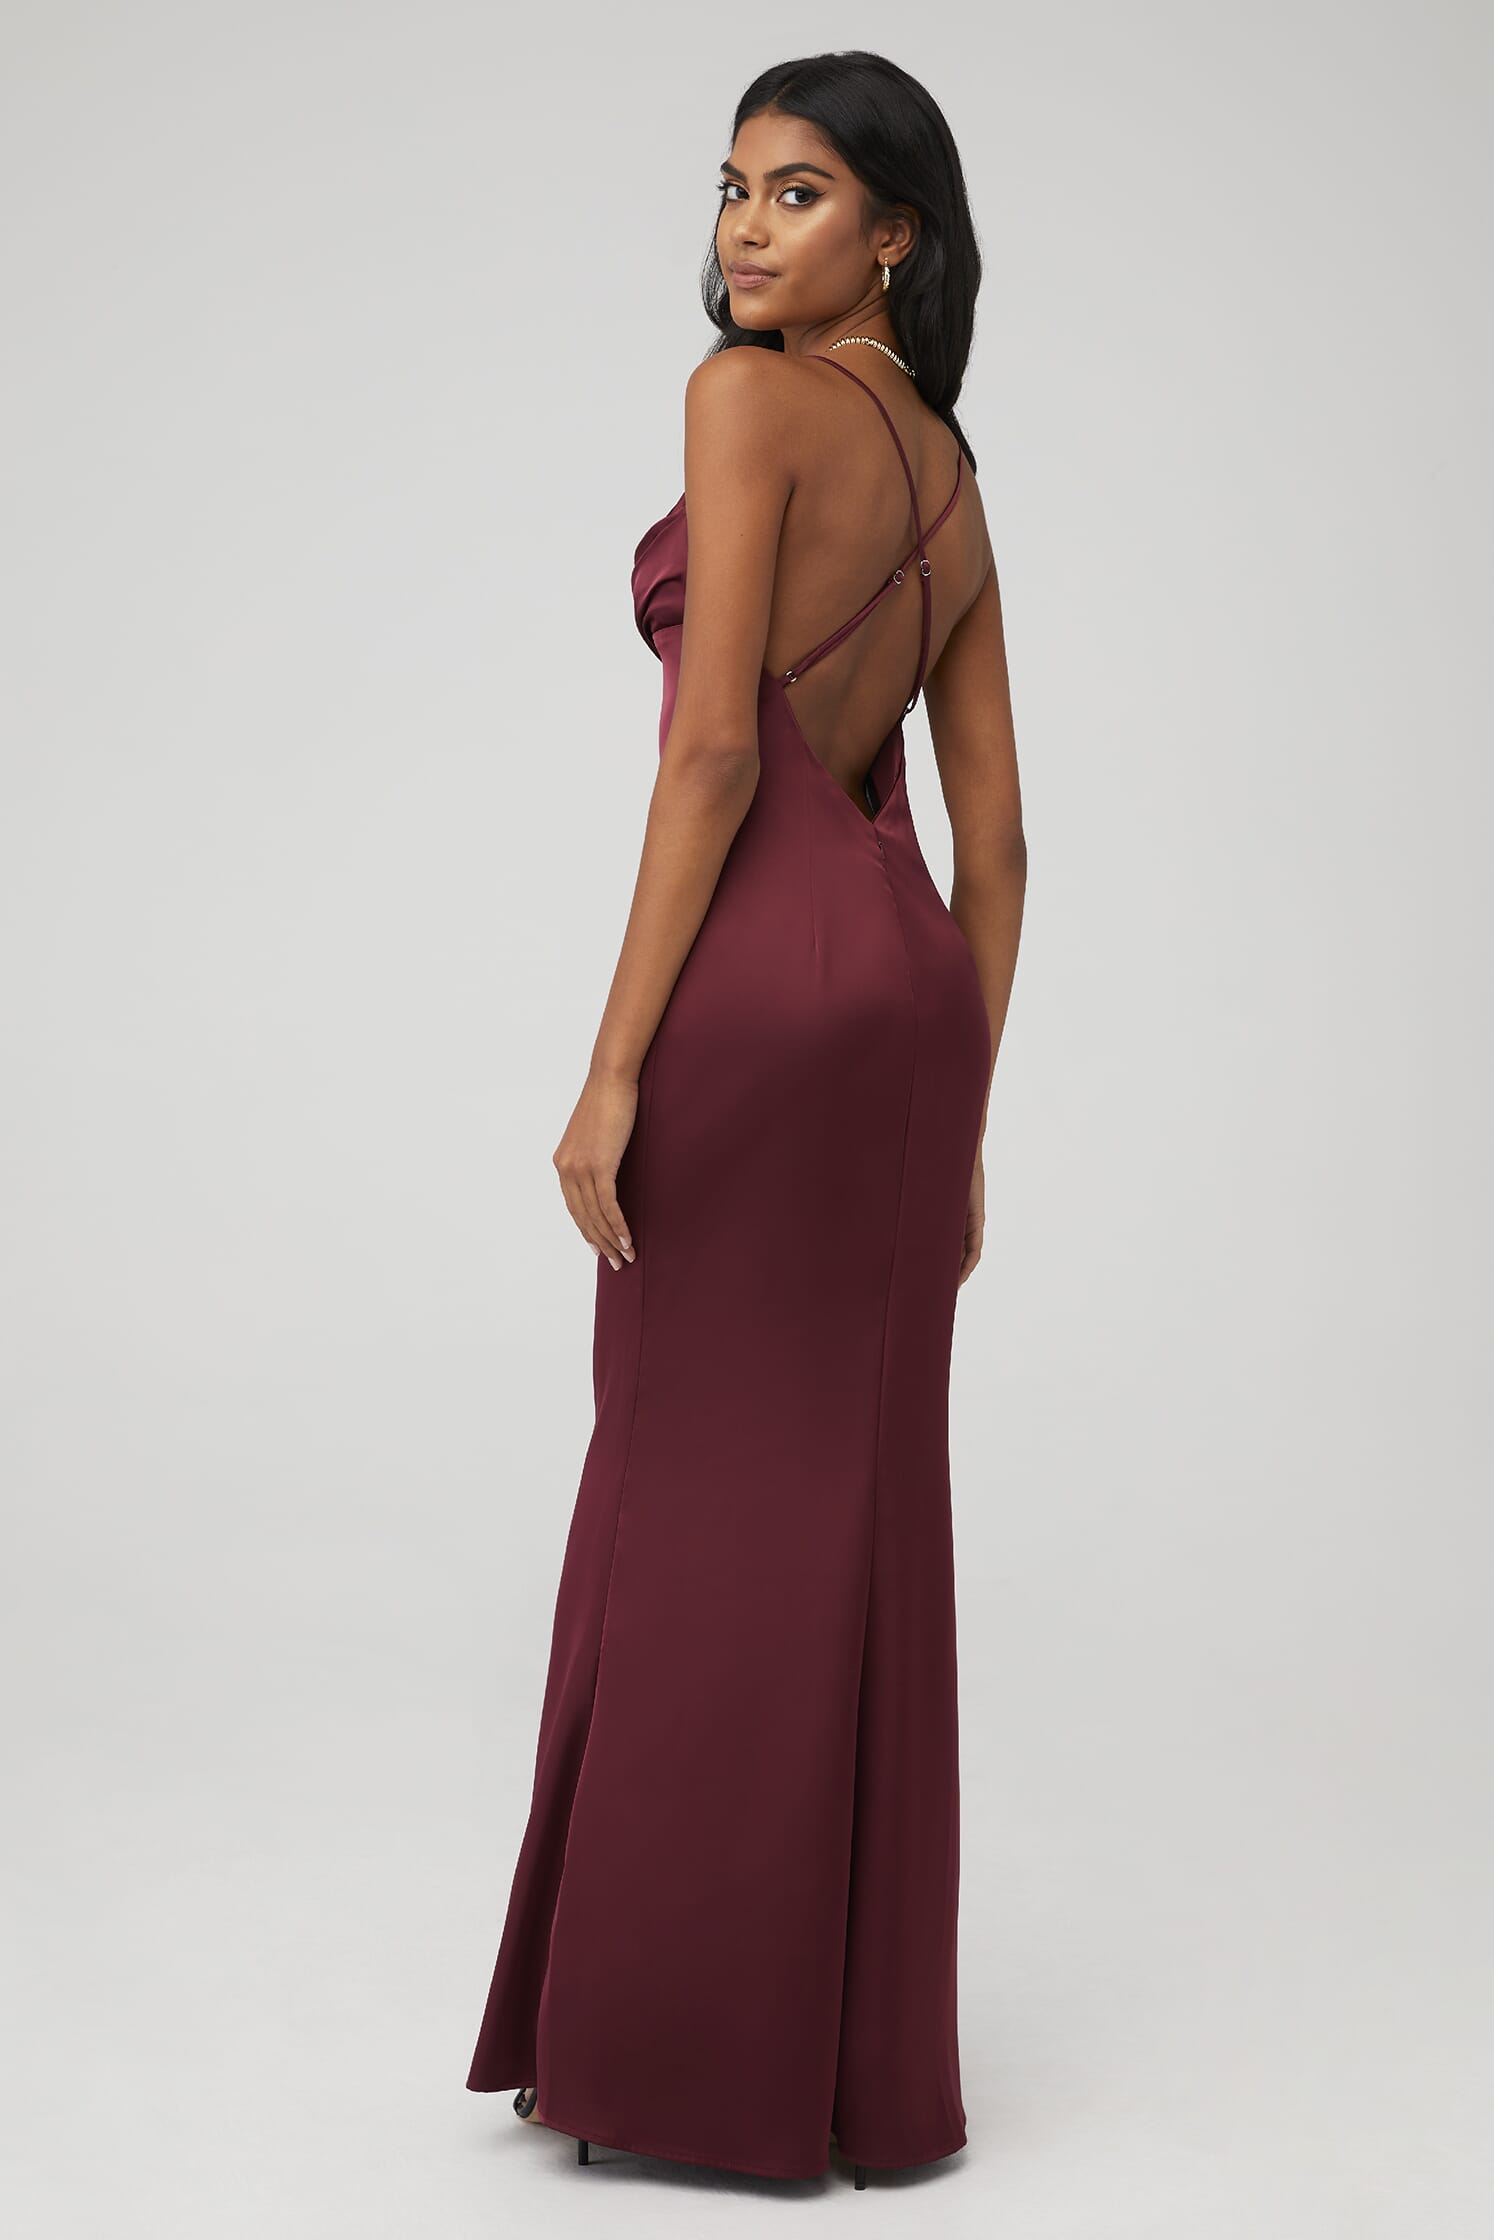 Katie May | Tara Gown in Bordeaux| FashionPass